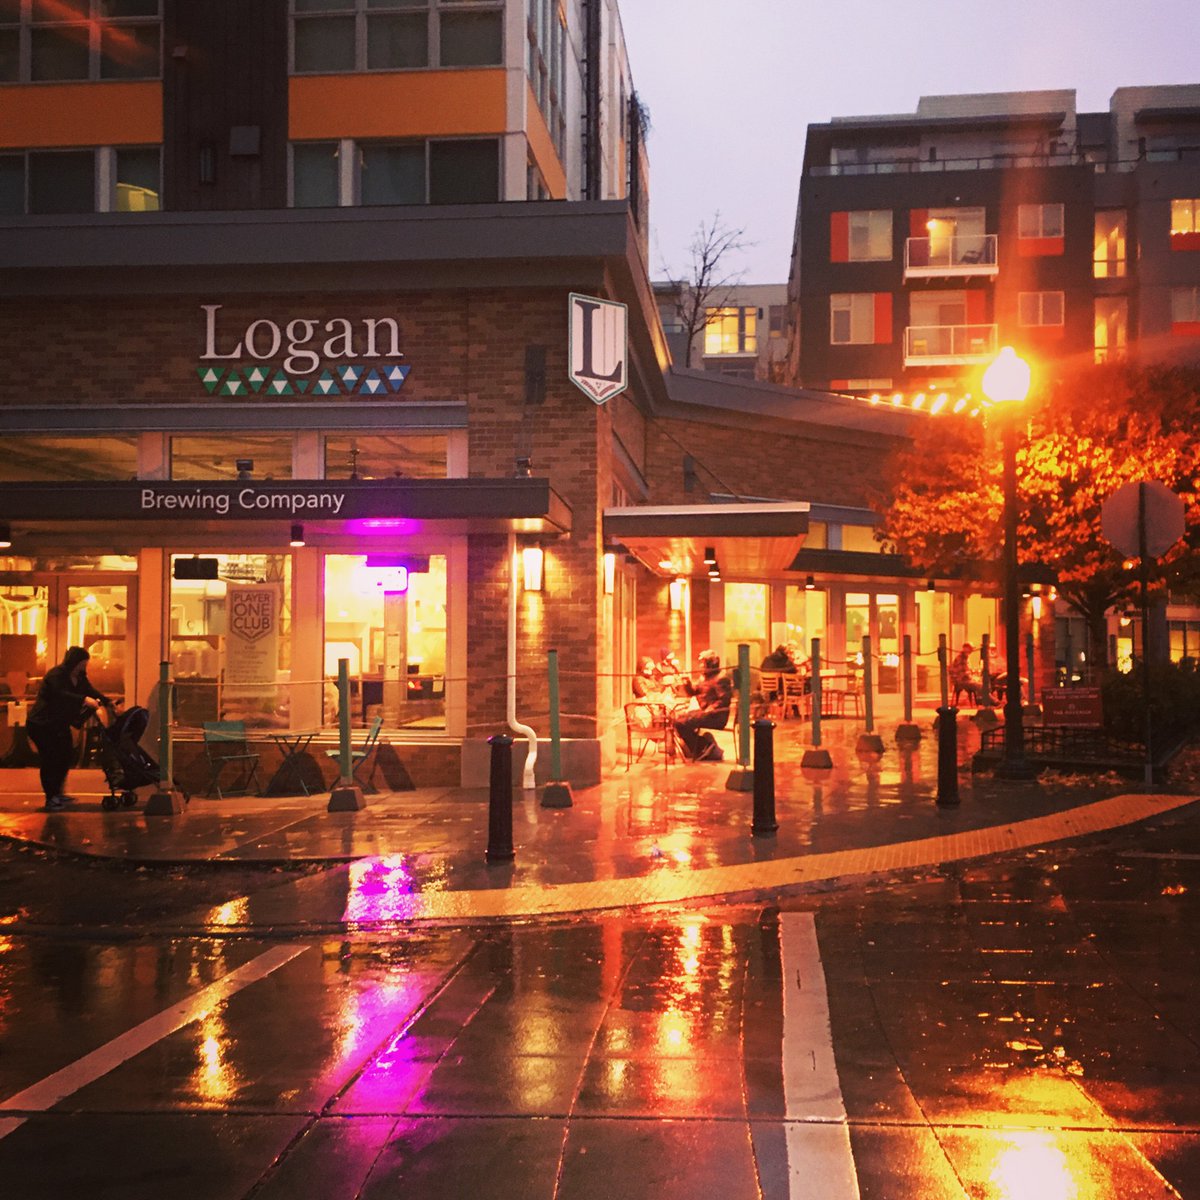 It may be raining, but we’ve got heat lamps! Join us for a cozy pint, we are open until 10 tonight! #loganbrewing #heatedpatio #coveredpatio #fallvibes #burien #cozyvibes #drinklocal